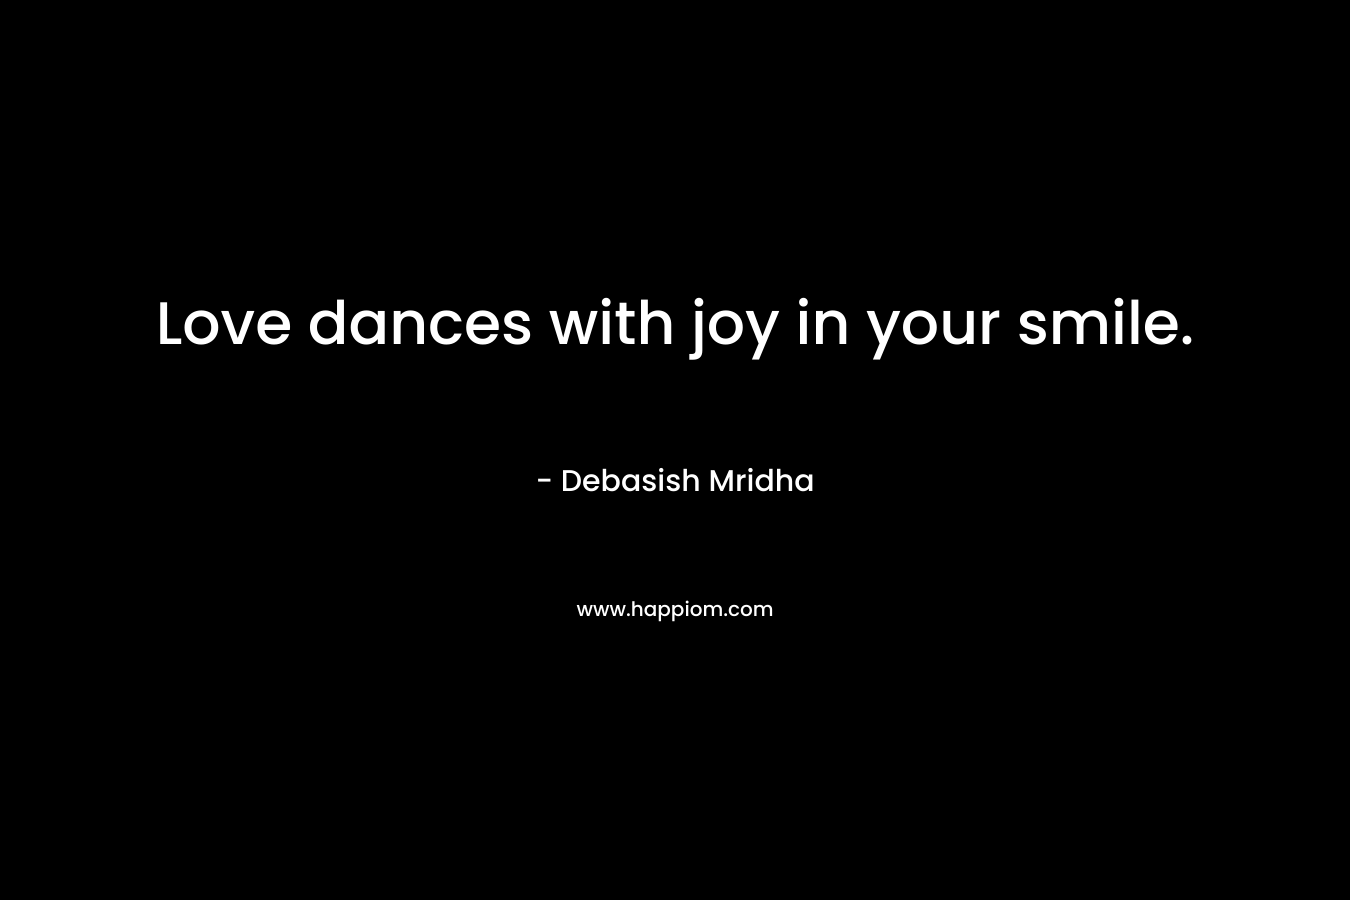 Love dances with joy in your smile.